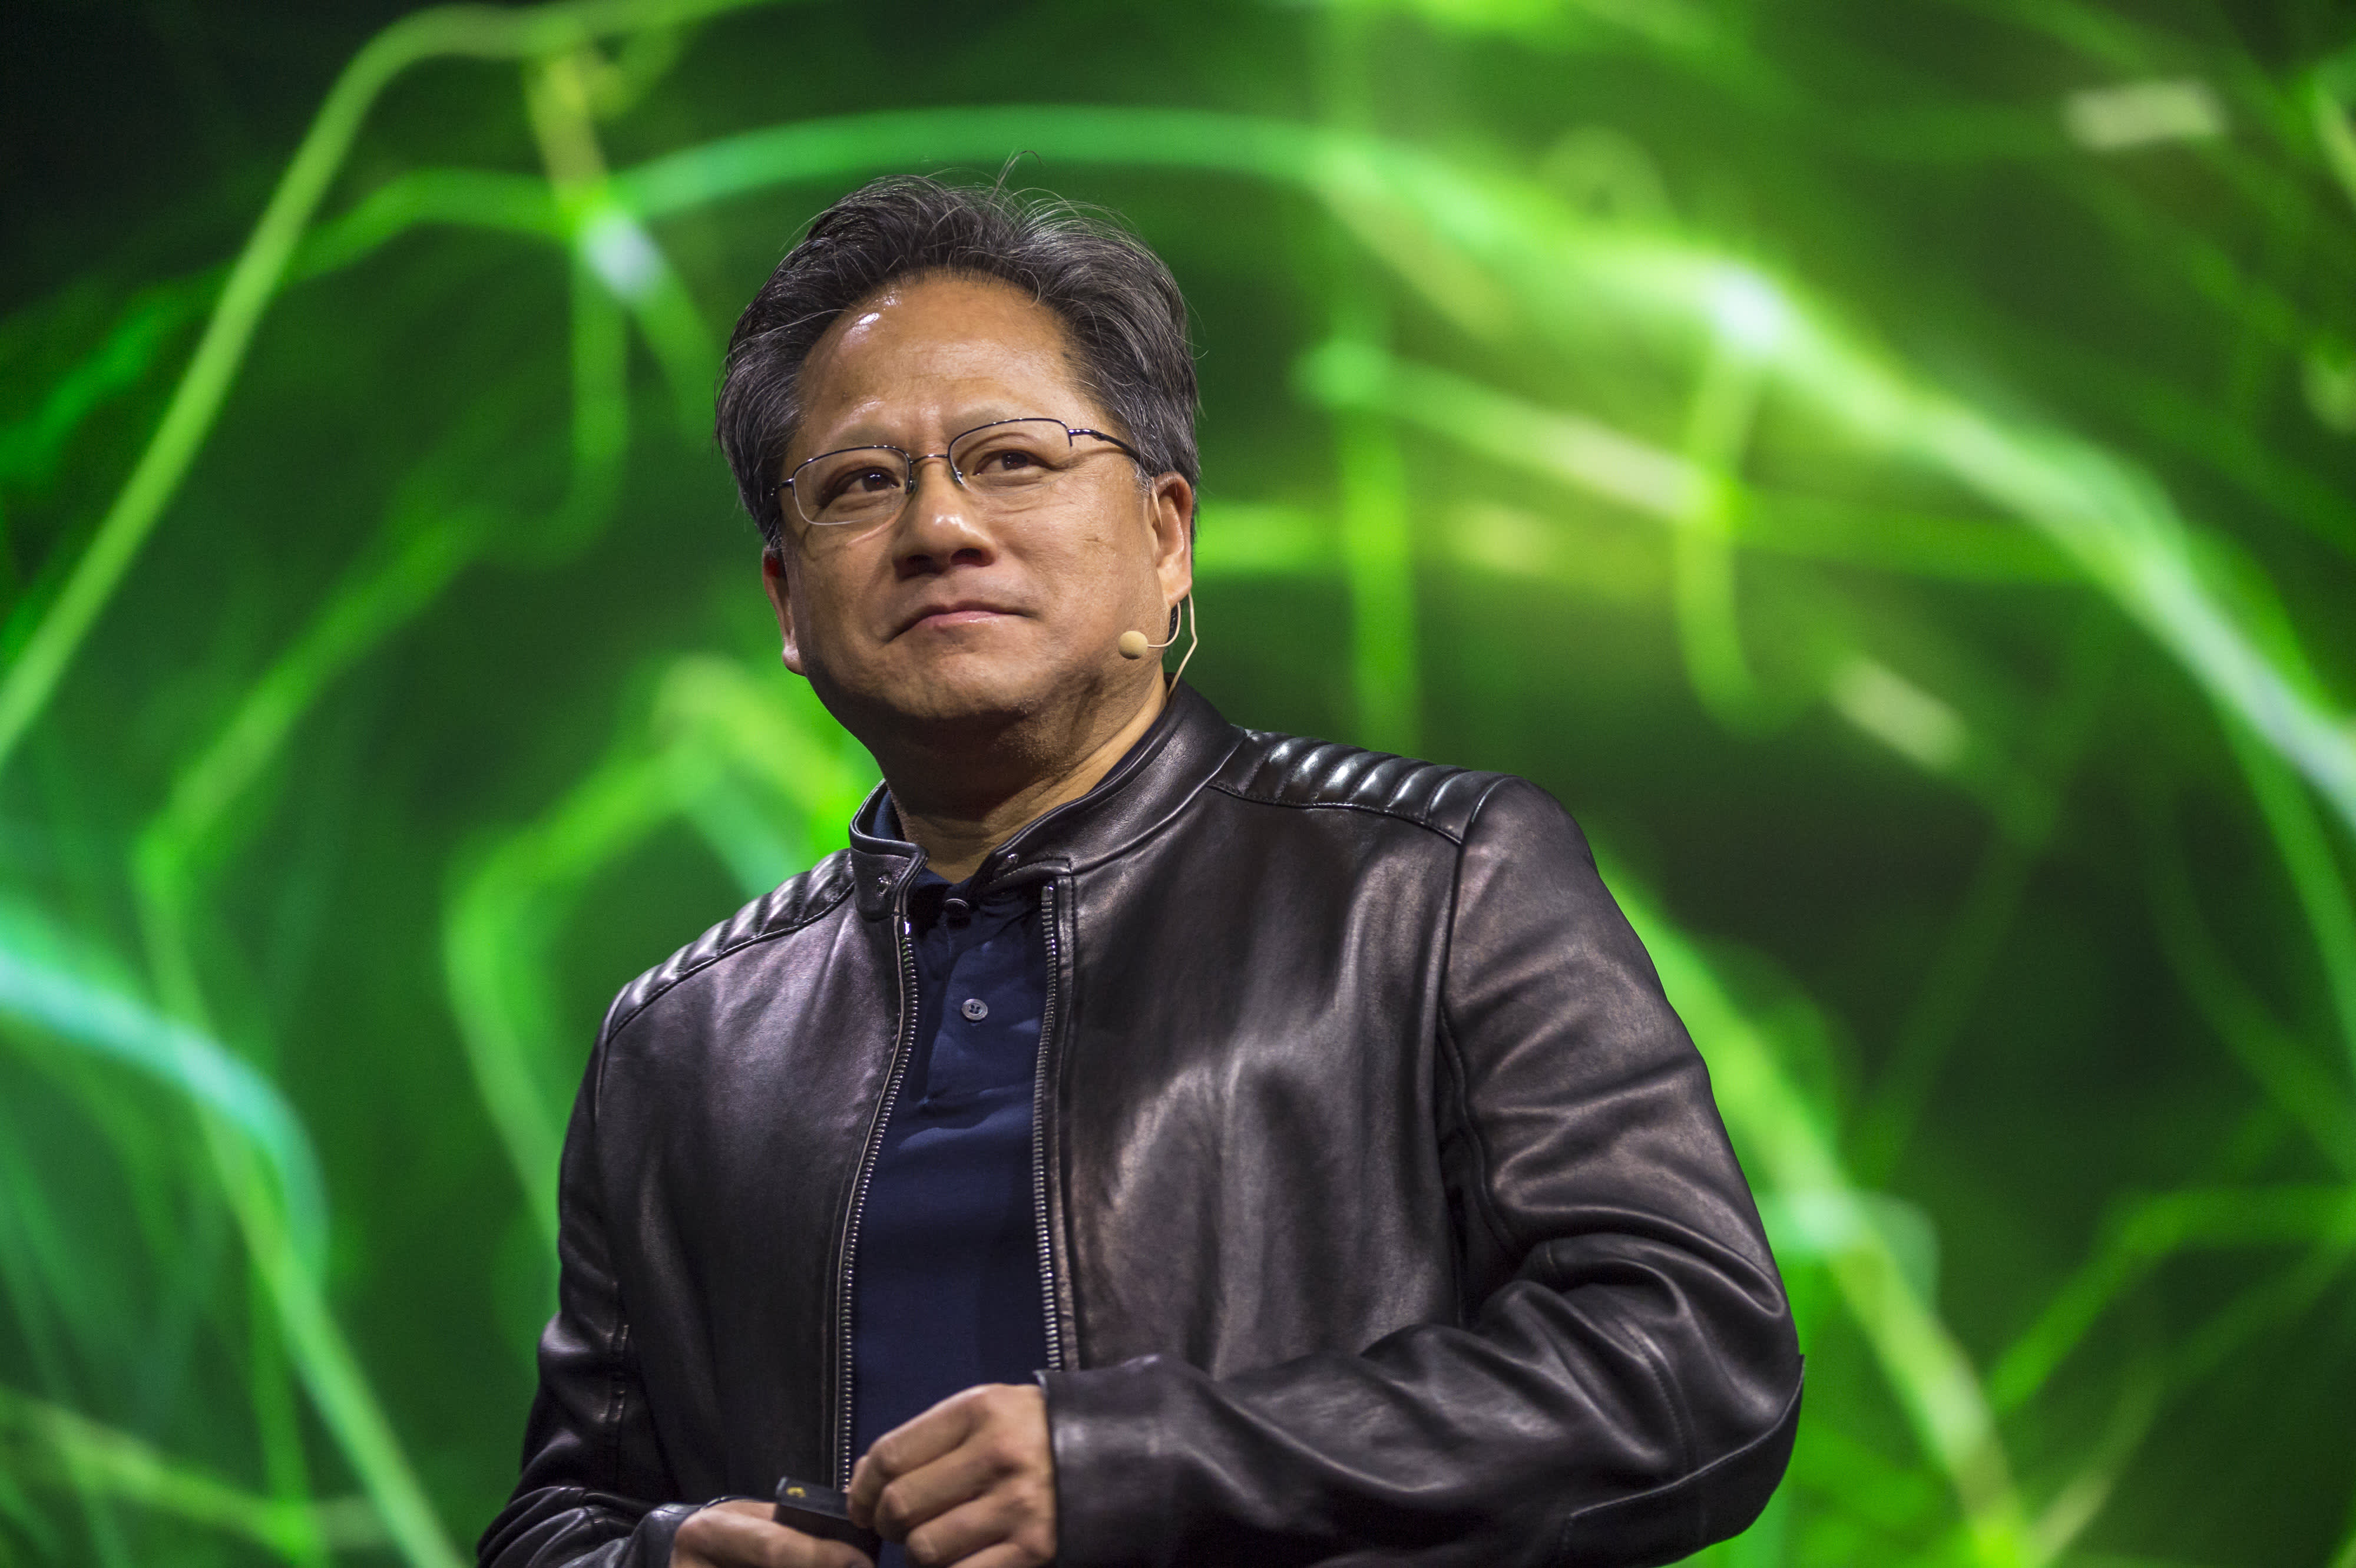 Nvidia CEO tries to soothe investor angst over gaming as new graphics cards are set to launch